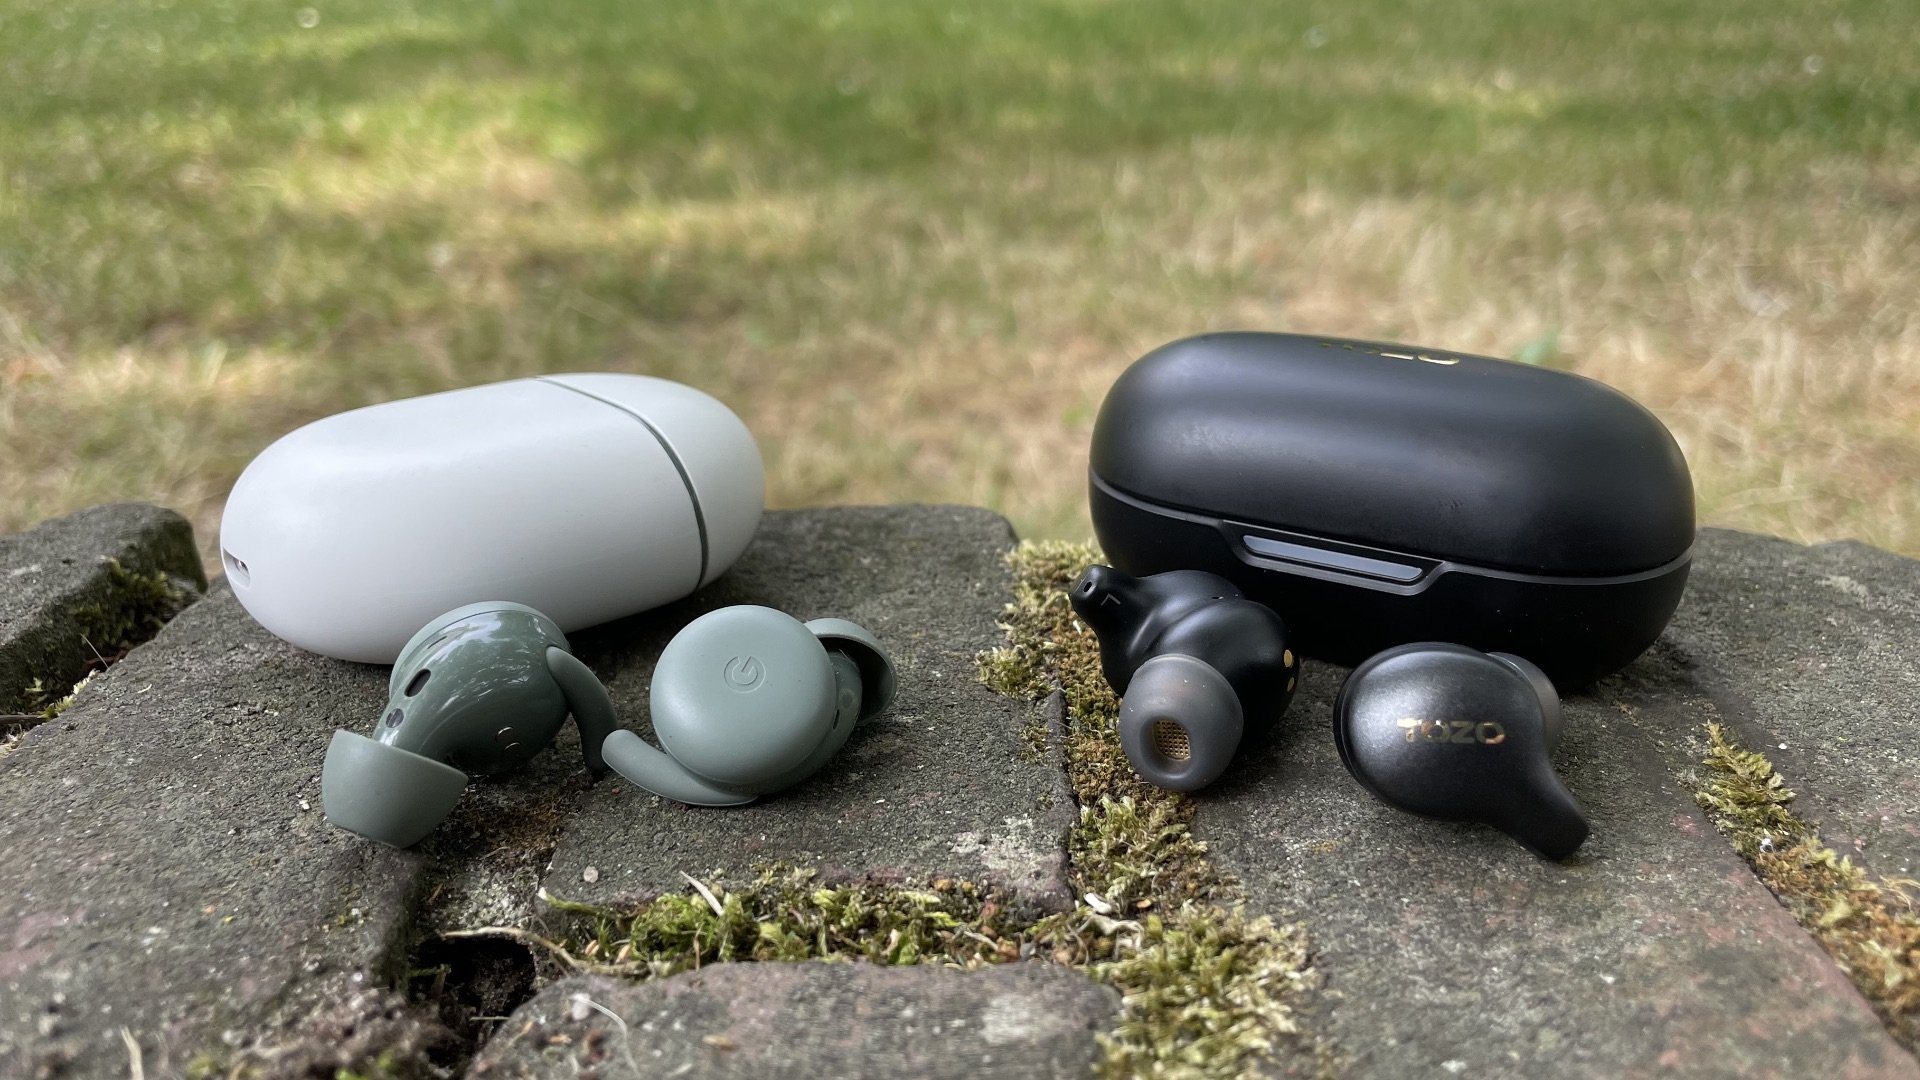 Pixel Buds A-Series review: Google's cheaper but good earbuds